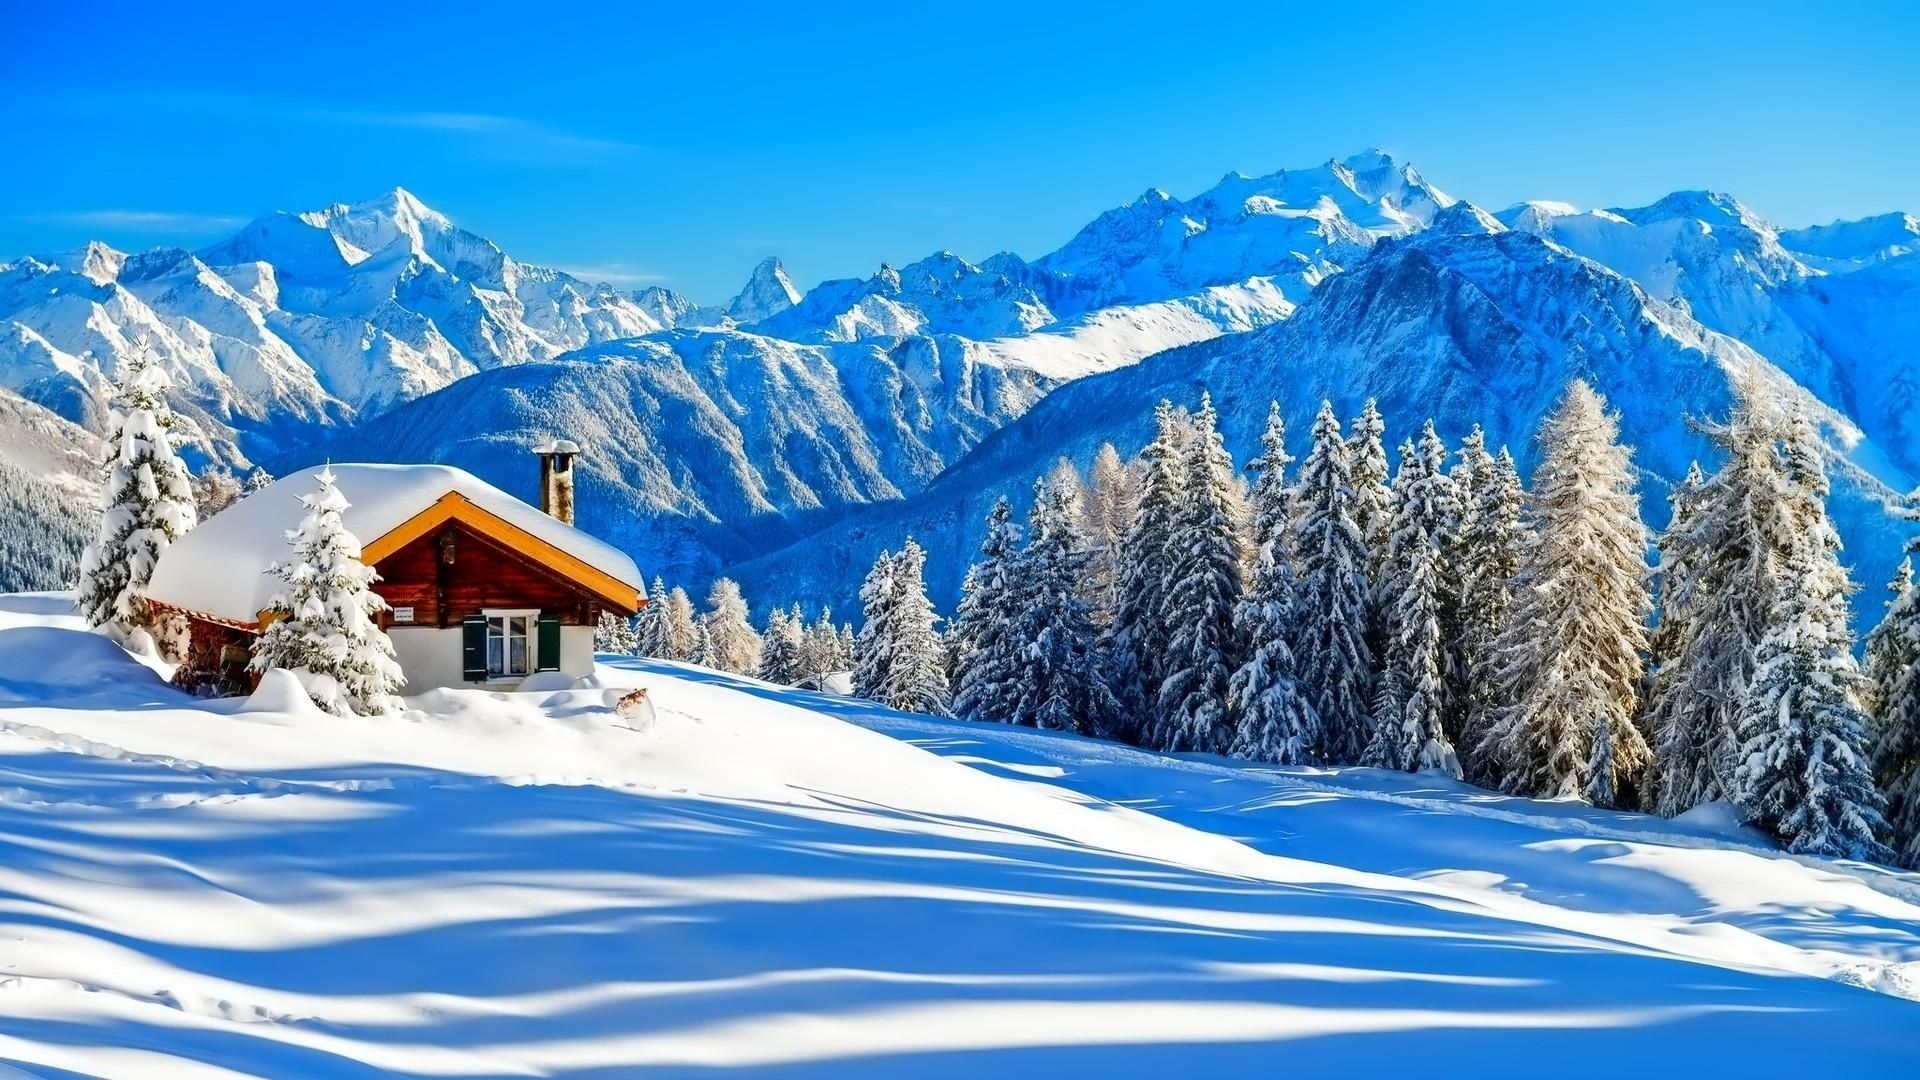 Wallpaper. Beautiful picture. photo. picture. Switzerland, the house, mountains, Alps, winter